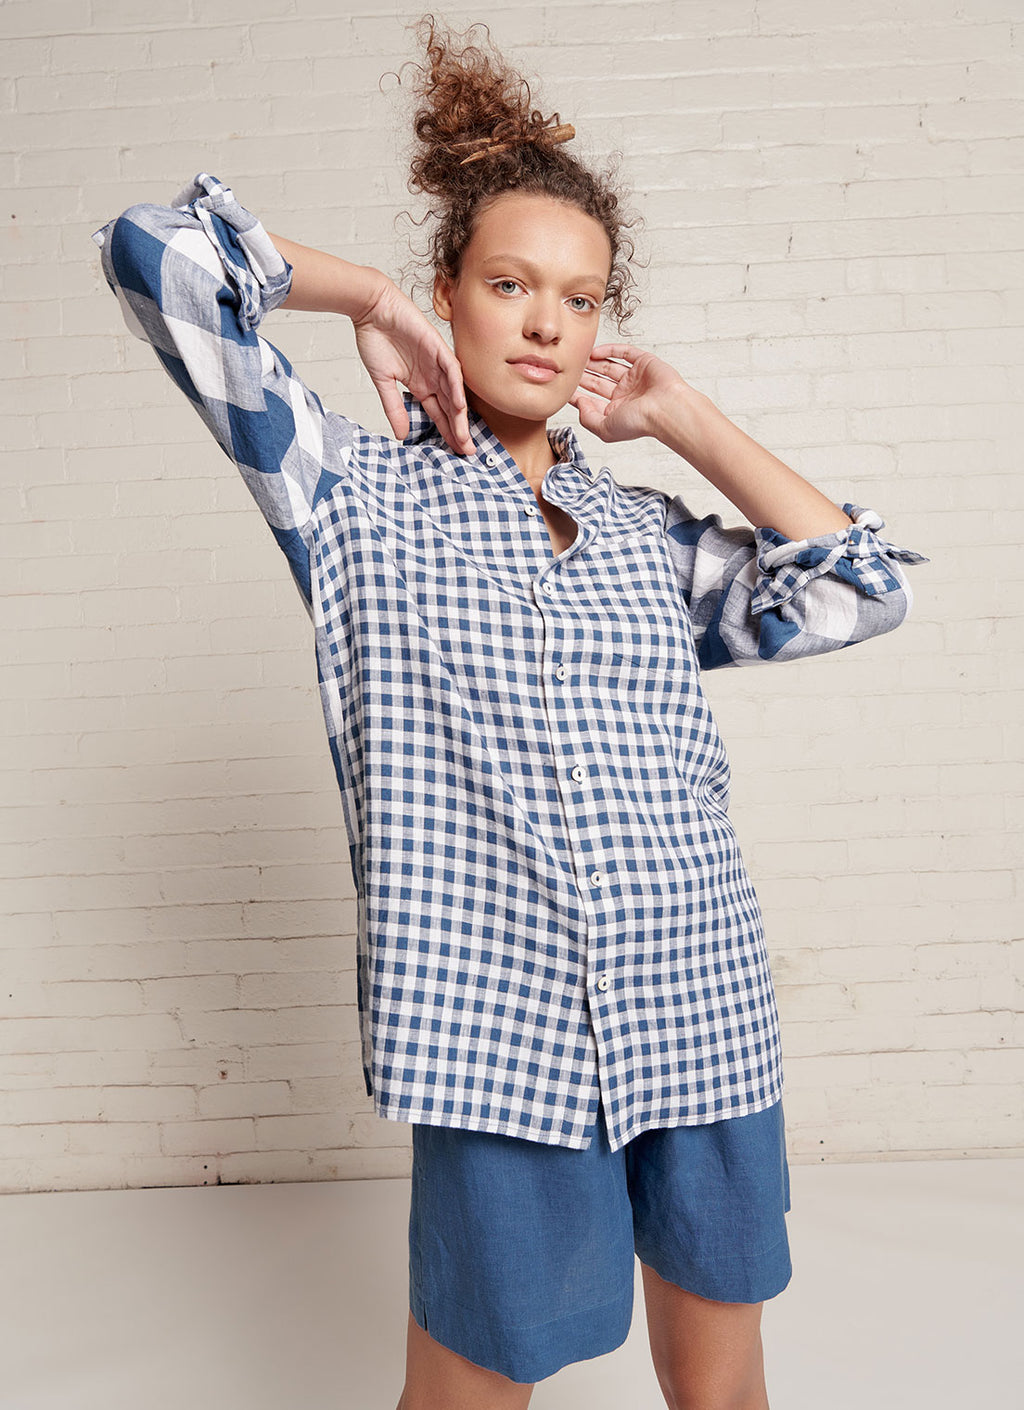 An indigo and white gingham, relaxed fit, unisex shirt with collar, sleeve cuff and centre front button fastening made from mixed gingham yarn dye washed linen